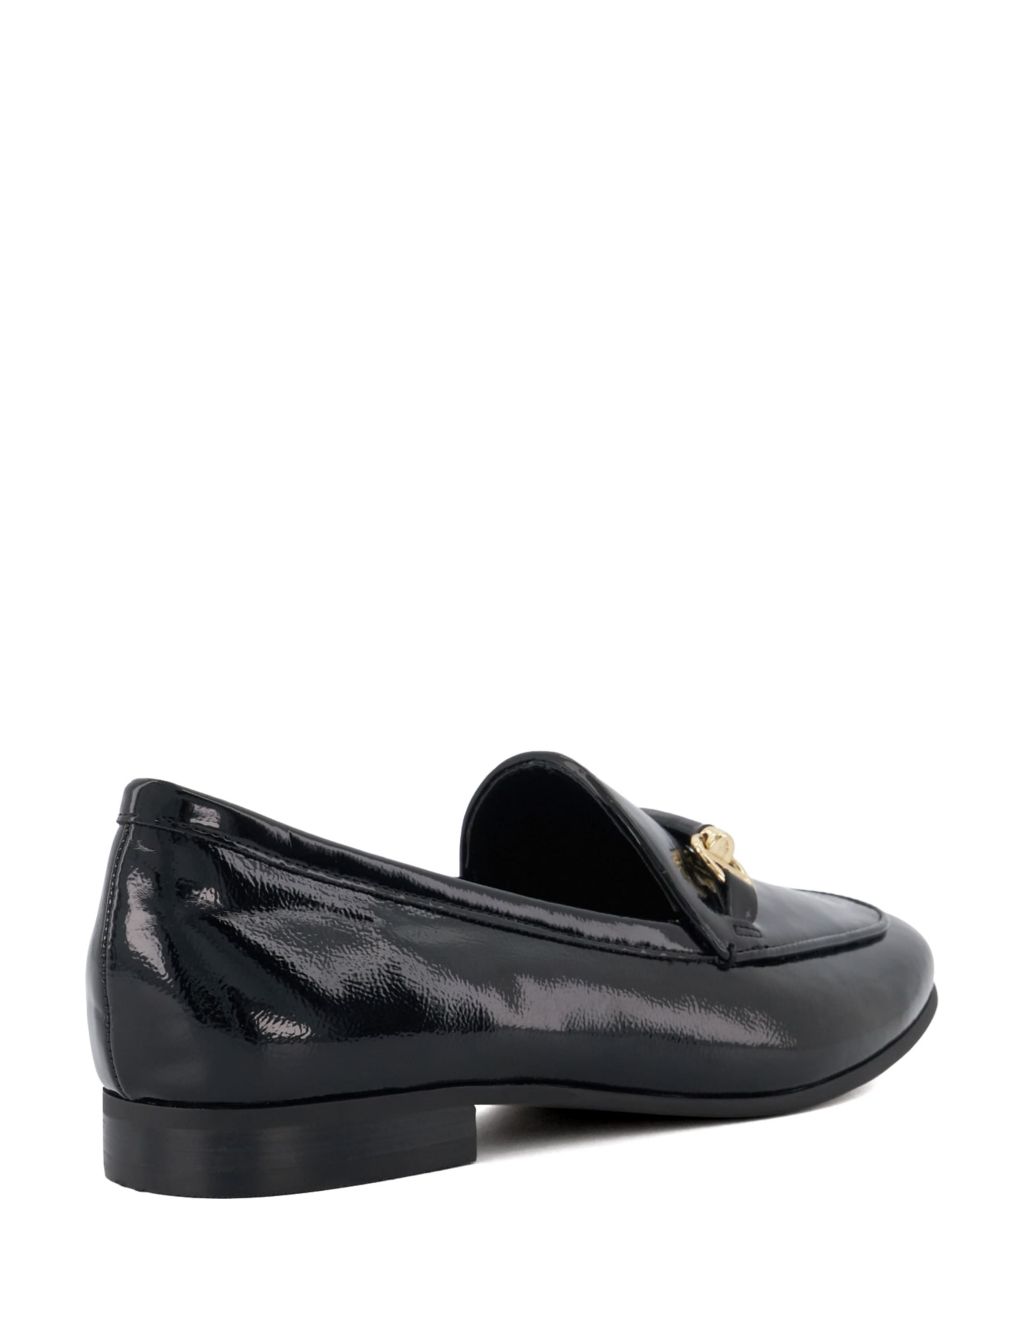 Leather Bar Trim Flat Loafers image 3